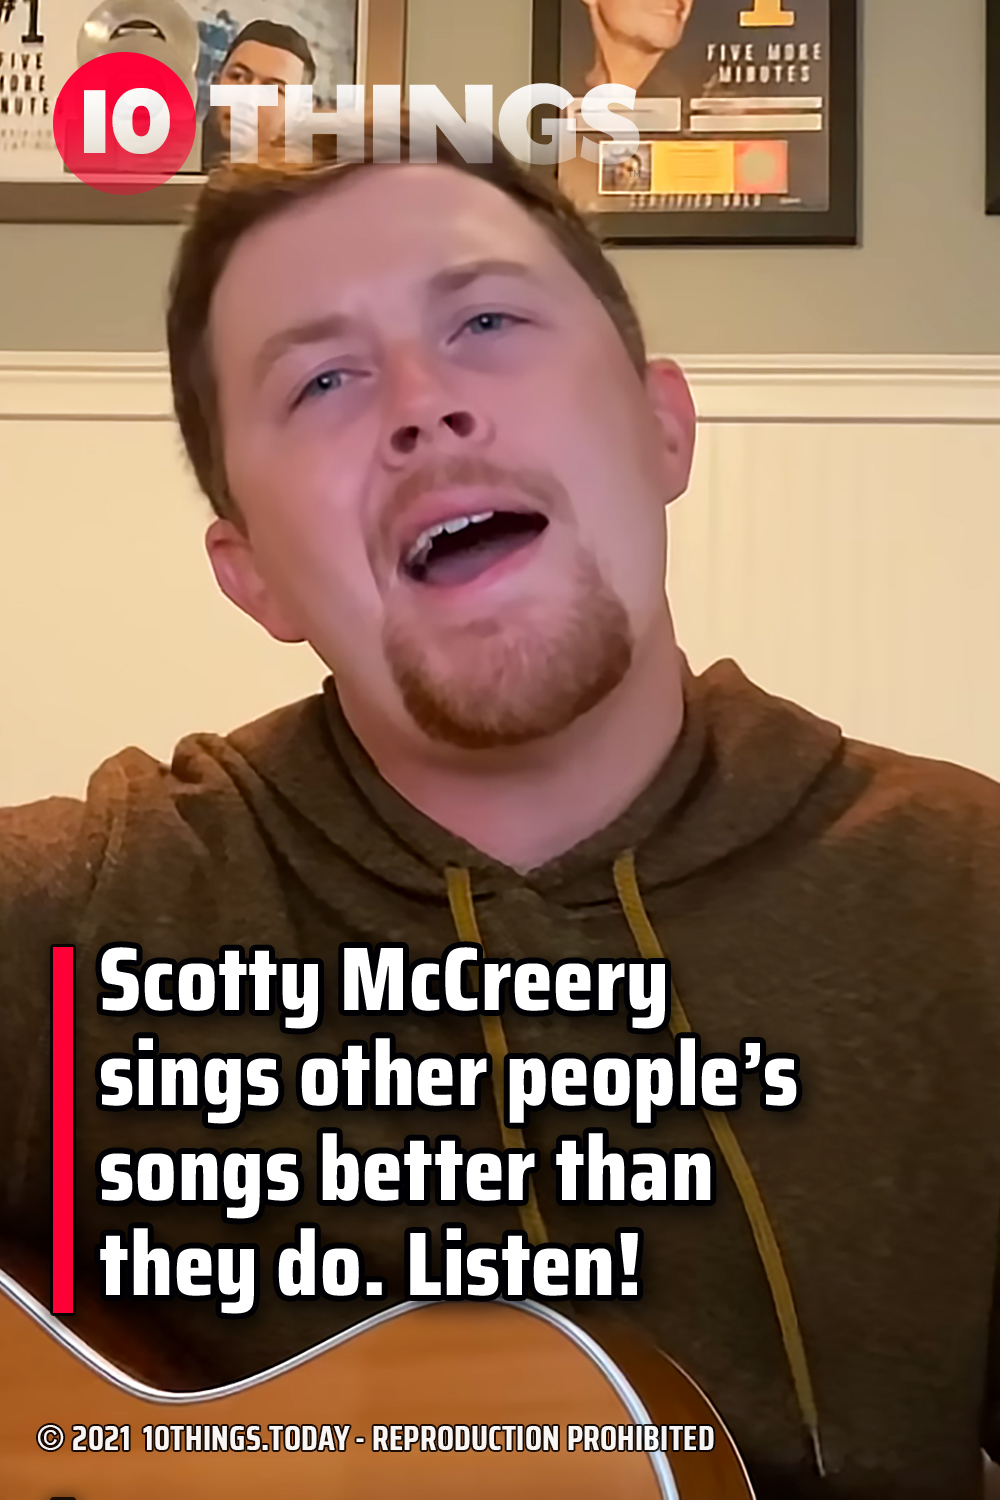 Scotty McCreery sings other people’s songs better than they do. Listen!